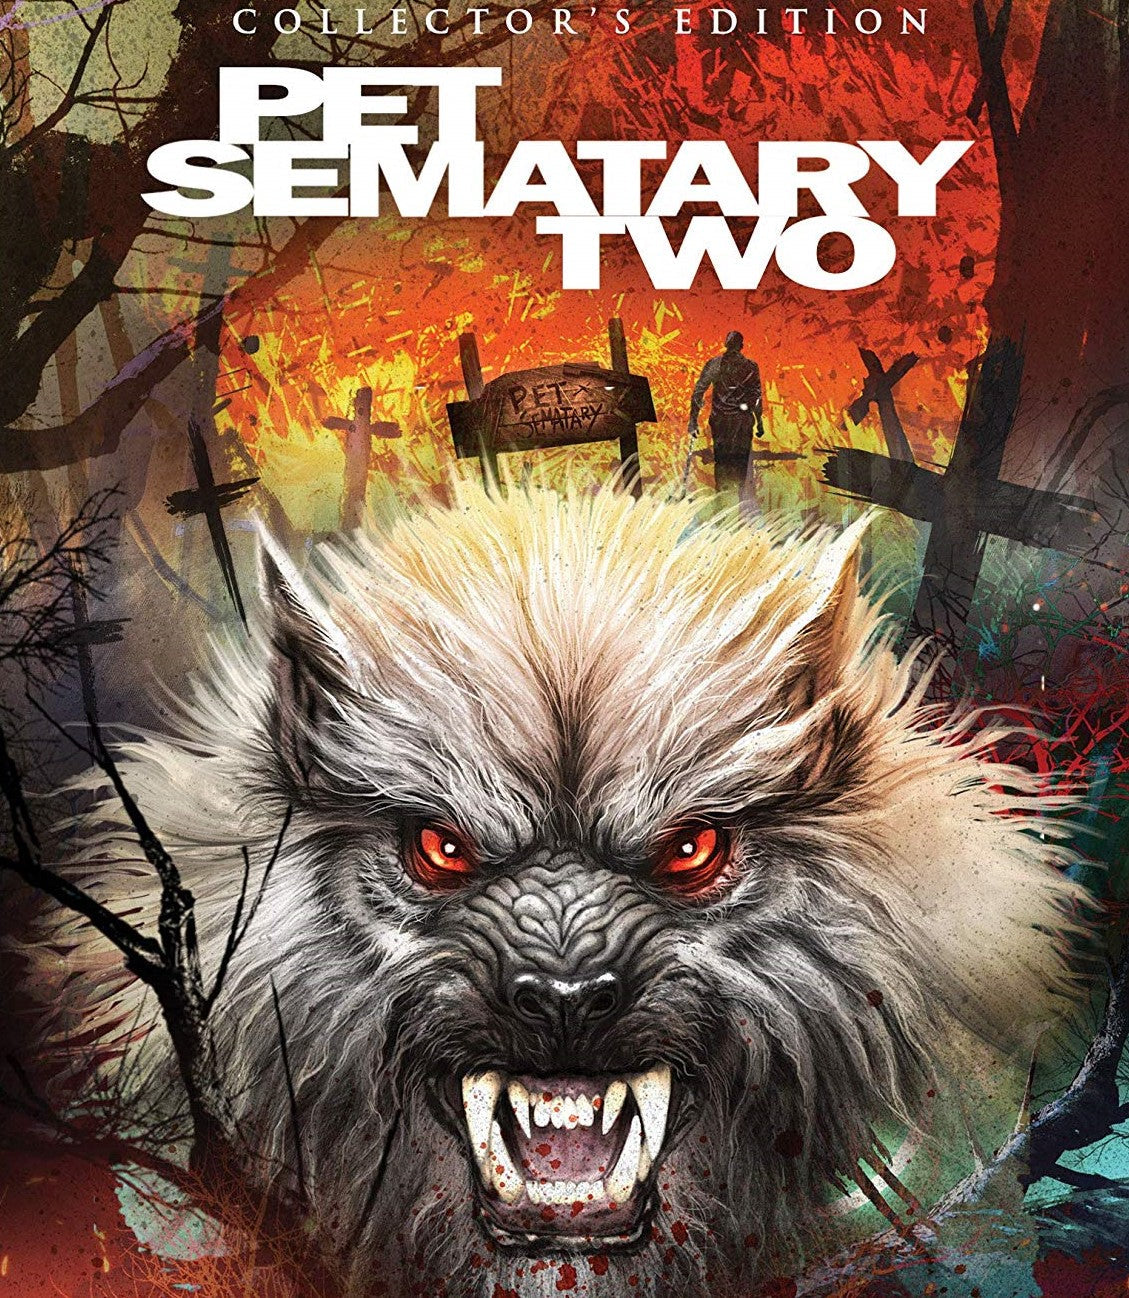 Pet Sematary Two (Collectors Edition) Blu-Ray Blu-Ray